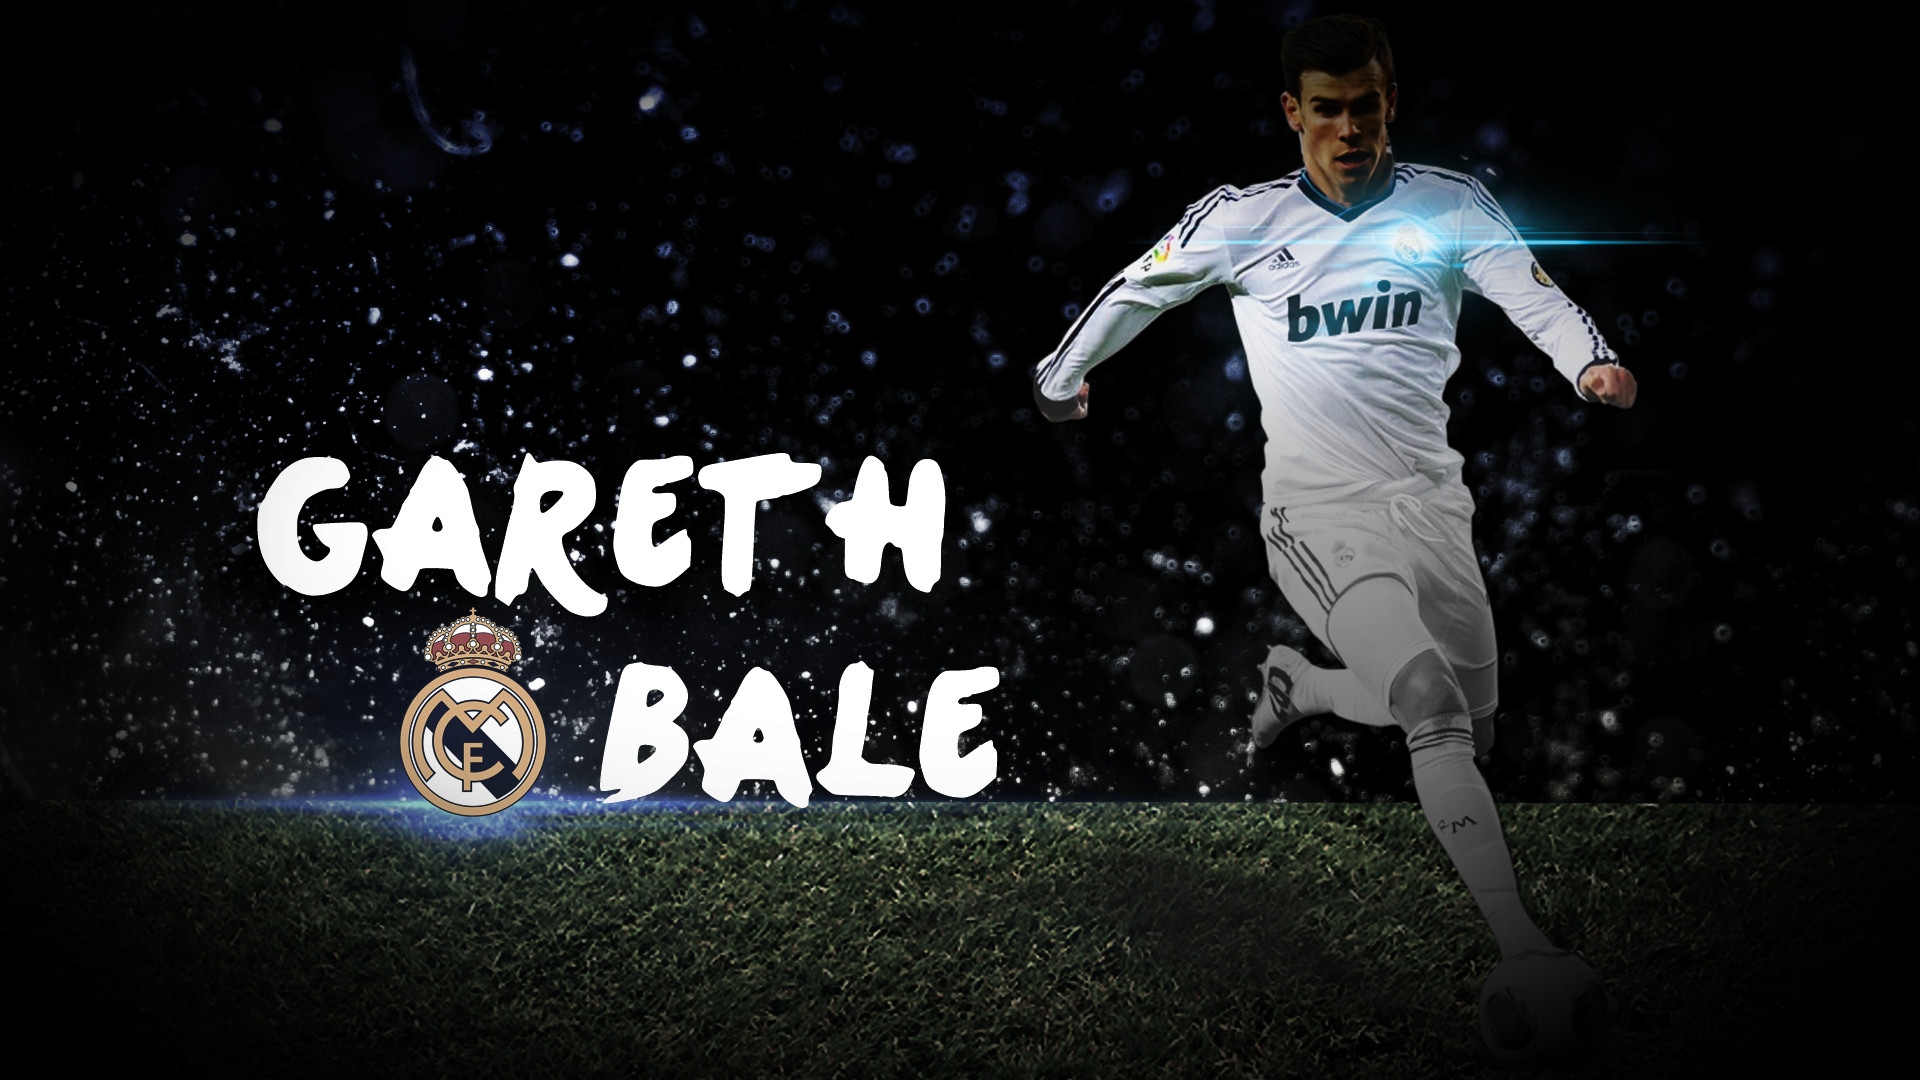 1920x1080 Gareth Bale photos and wallpapers 2018